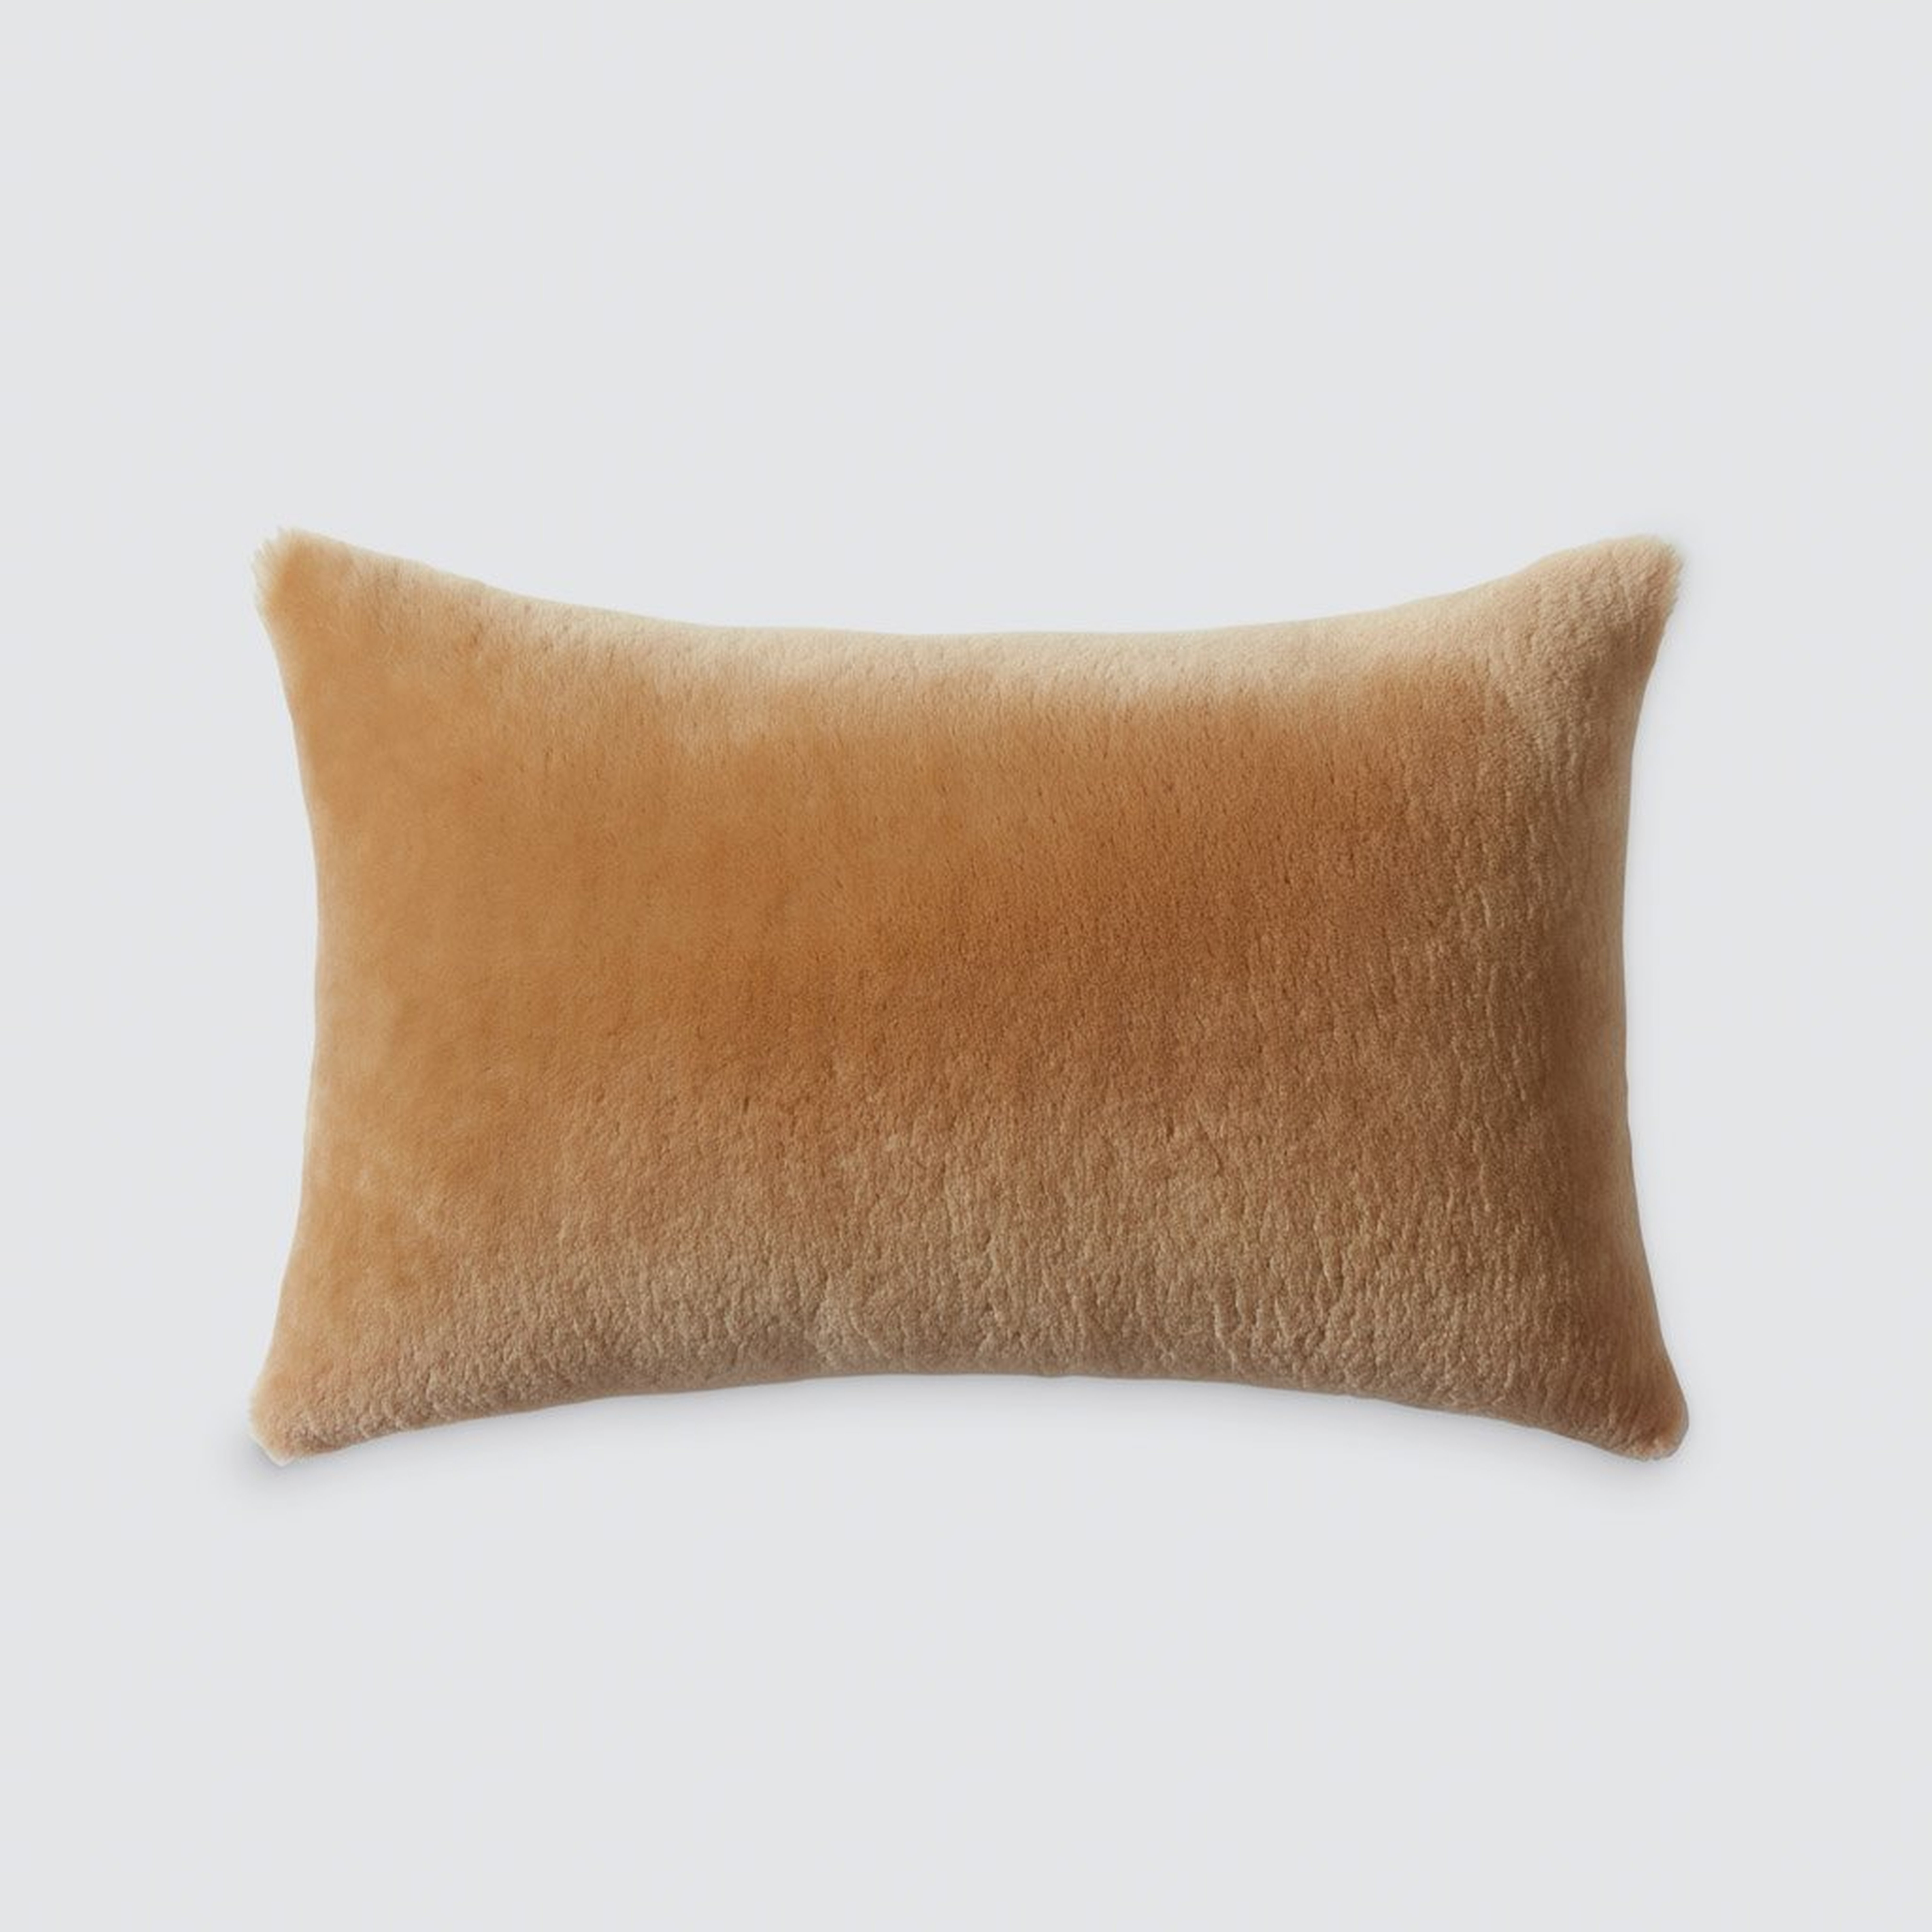 Sheepskin Lumbar Pillow - Tan By The Citizenry - The Citizenry